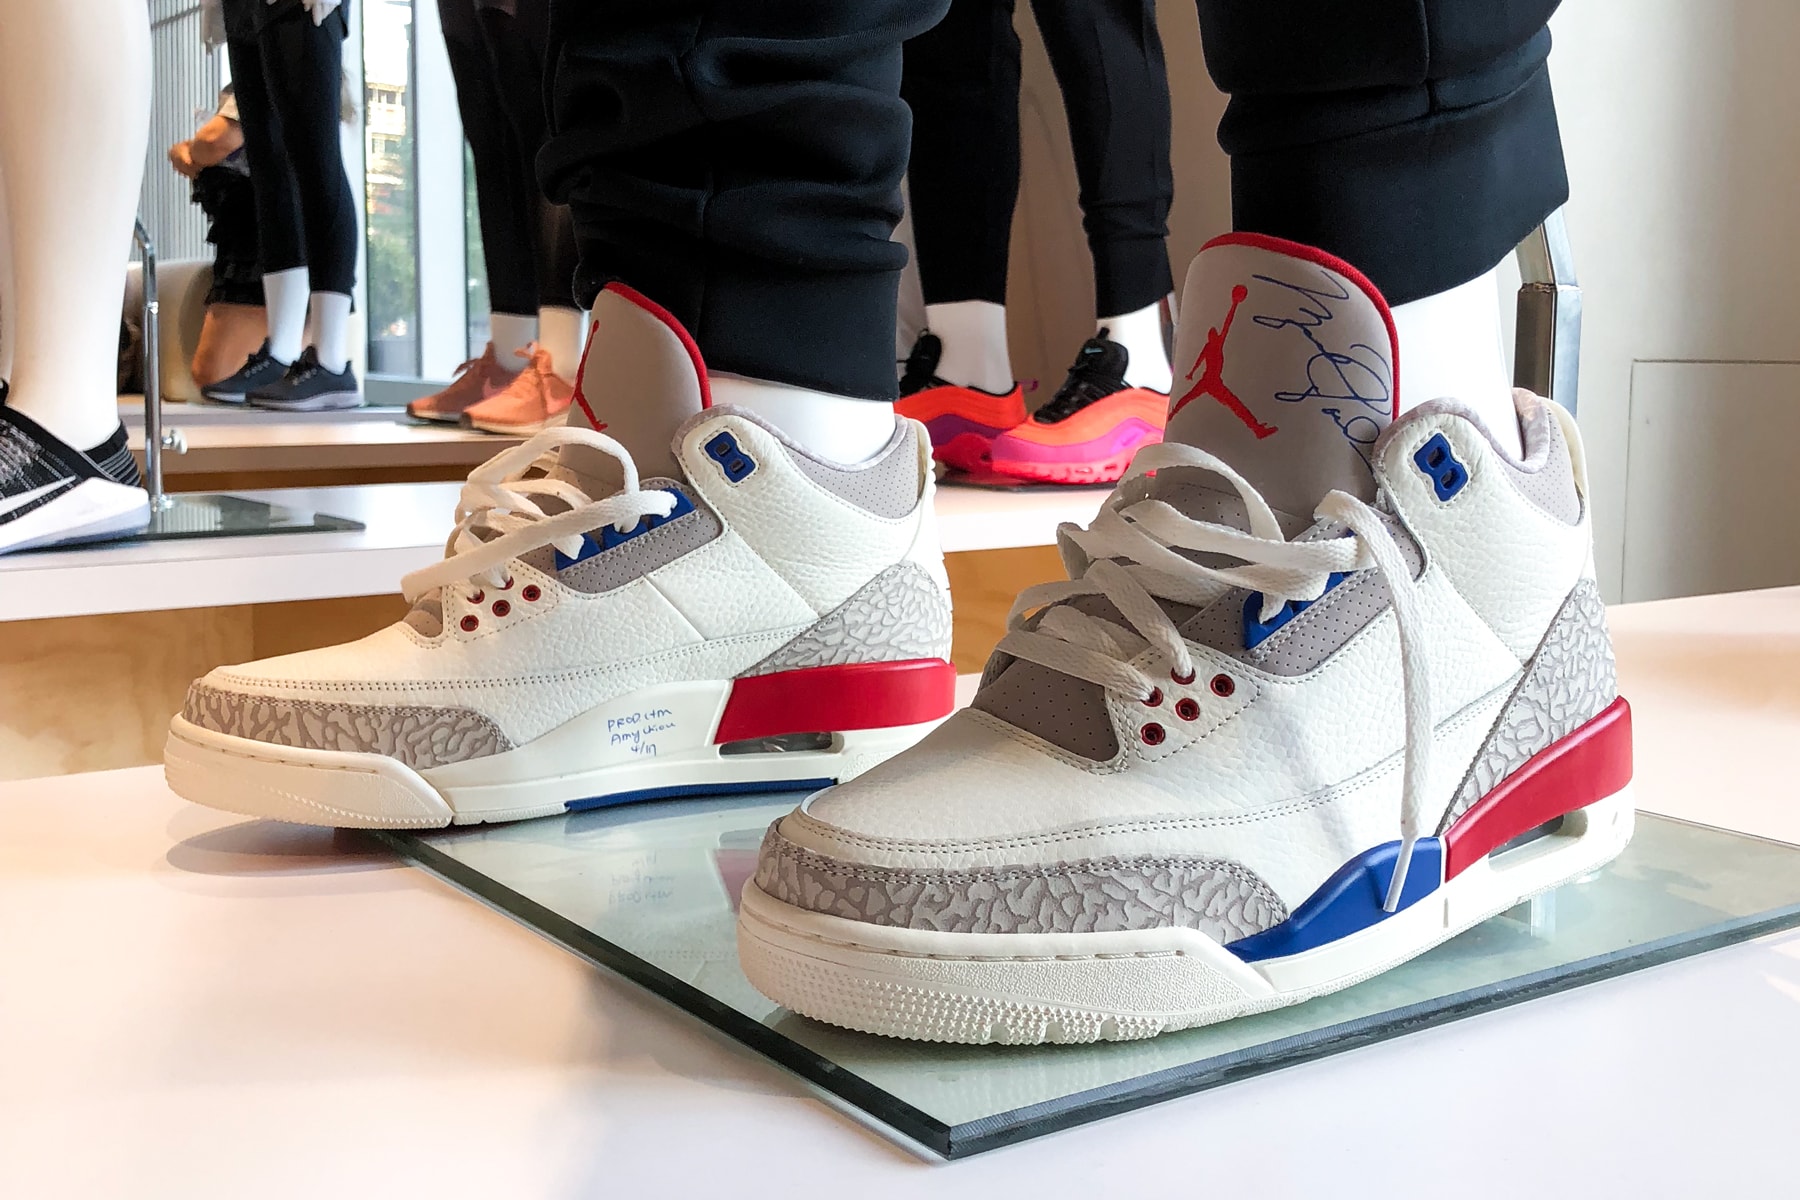 Air Jordan 3 "International Pack" Release Details July 7th 2018 Sneakers Kicks Shoes Trainers Information How to Buy Purchase Cop Brand